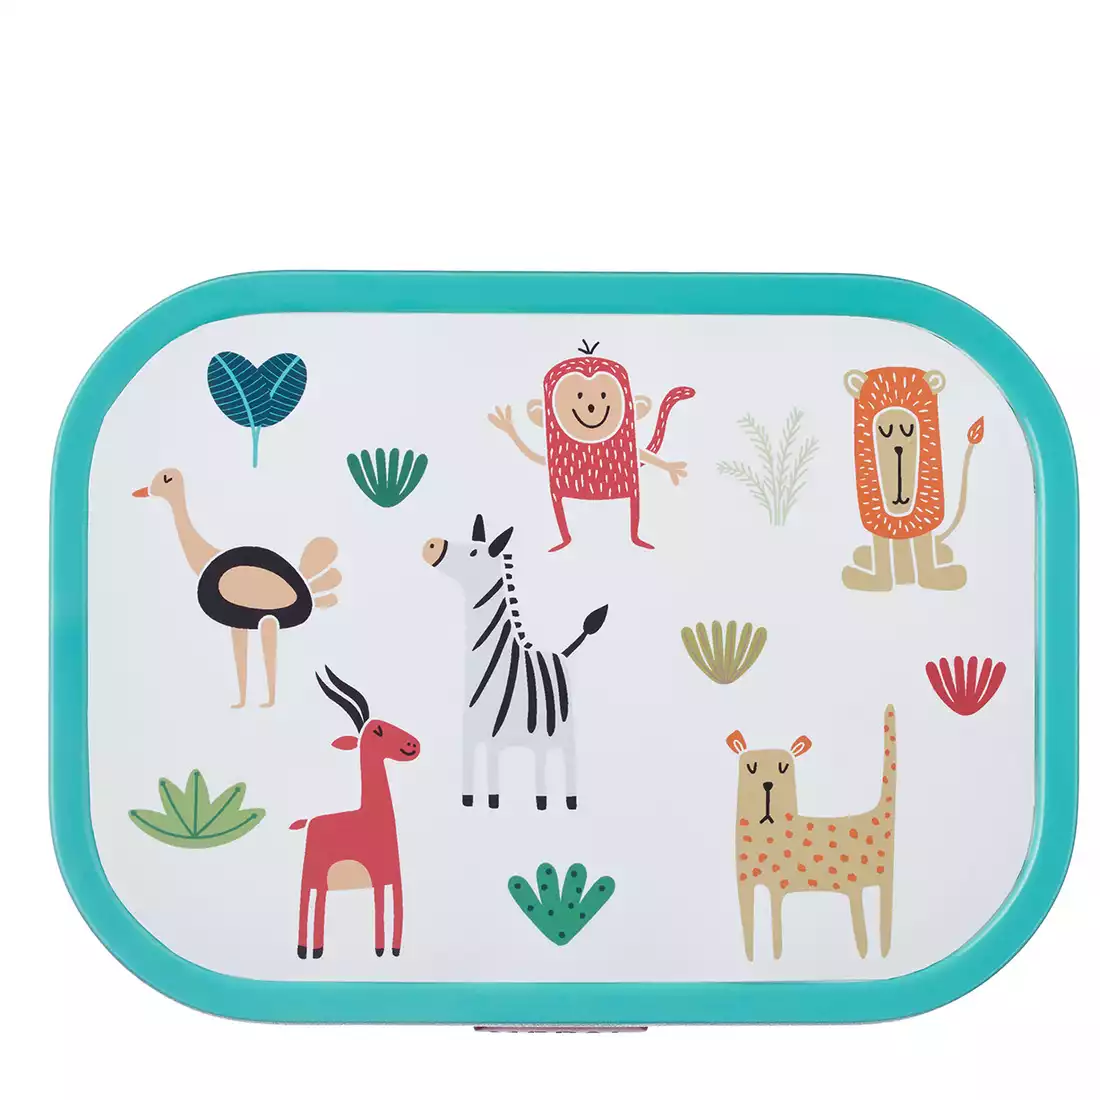 Mepal Campus Animal Friends children's lunchbox, white and turquoise